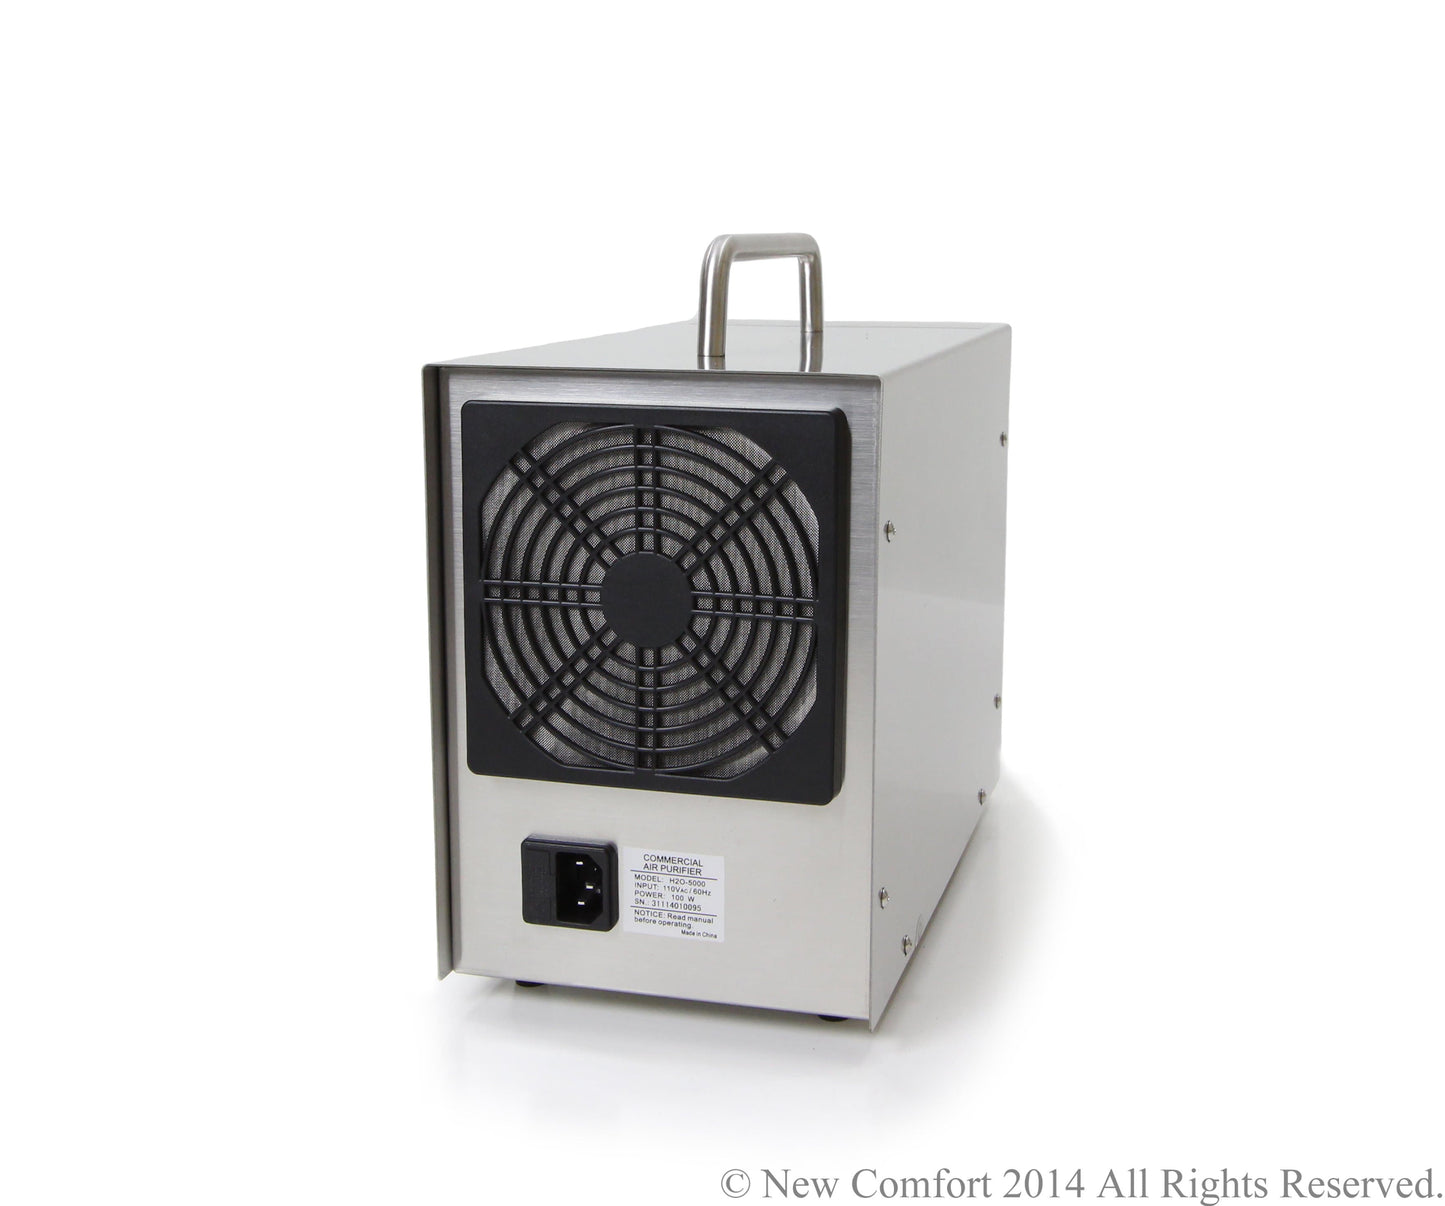 Demo Unit Dual Action Stainless Steel Ozone Generating Air & water Purifier by New Comfort